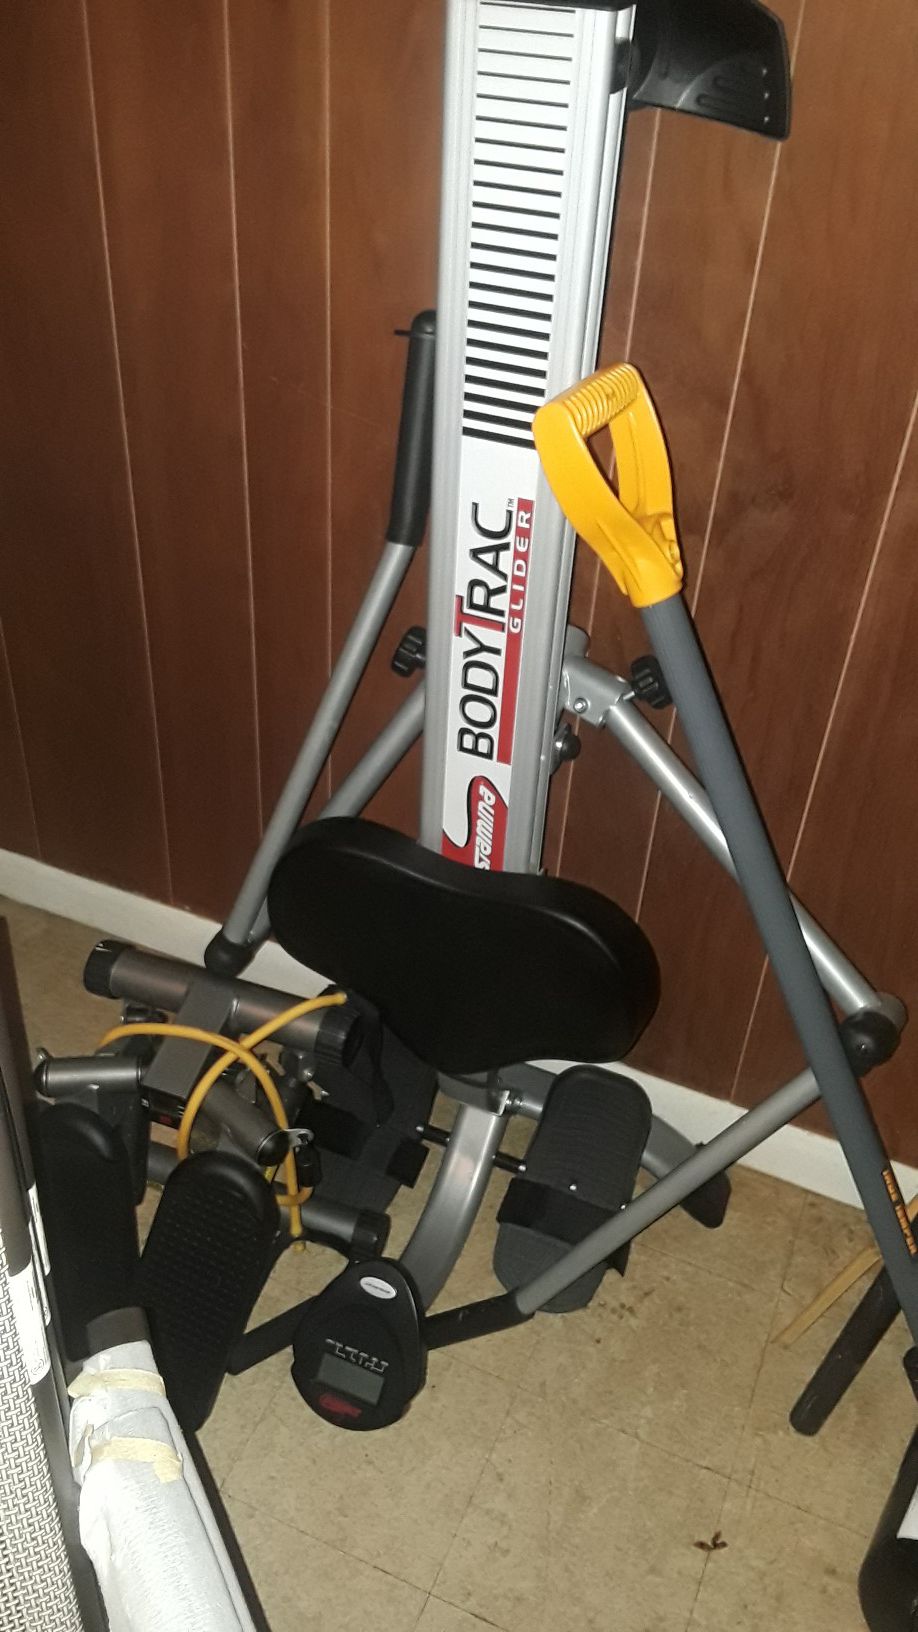 Exercise equipment can get both for the price obo